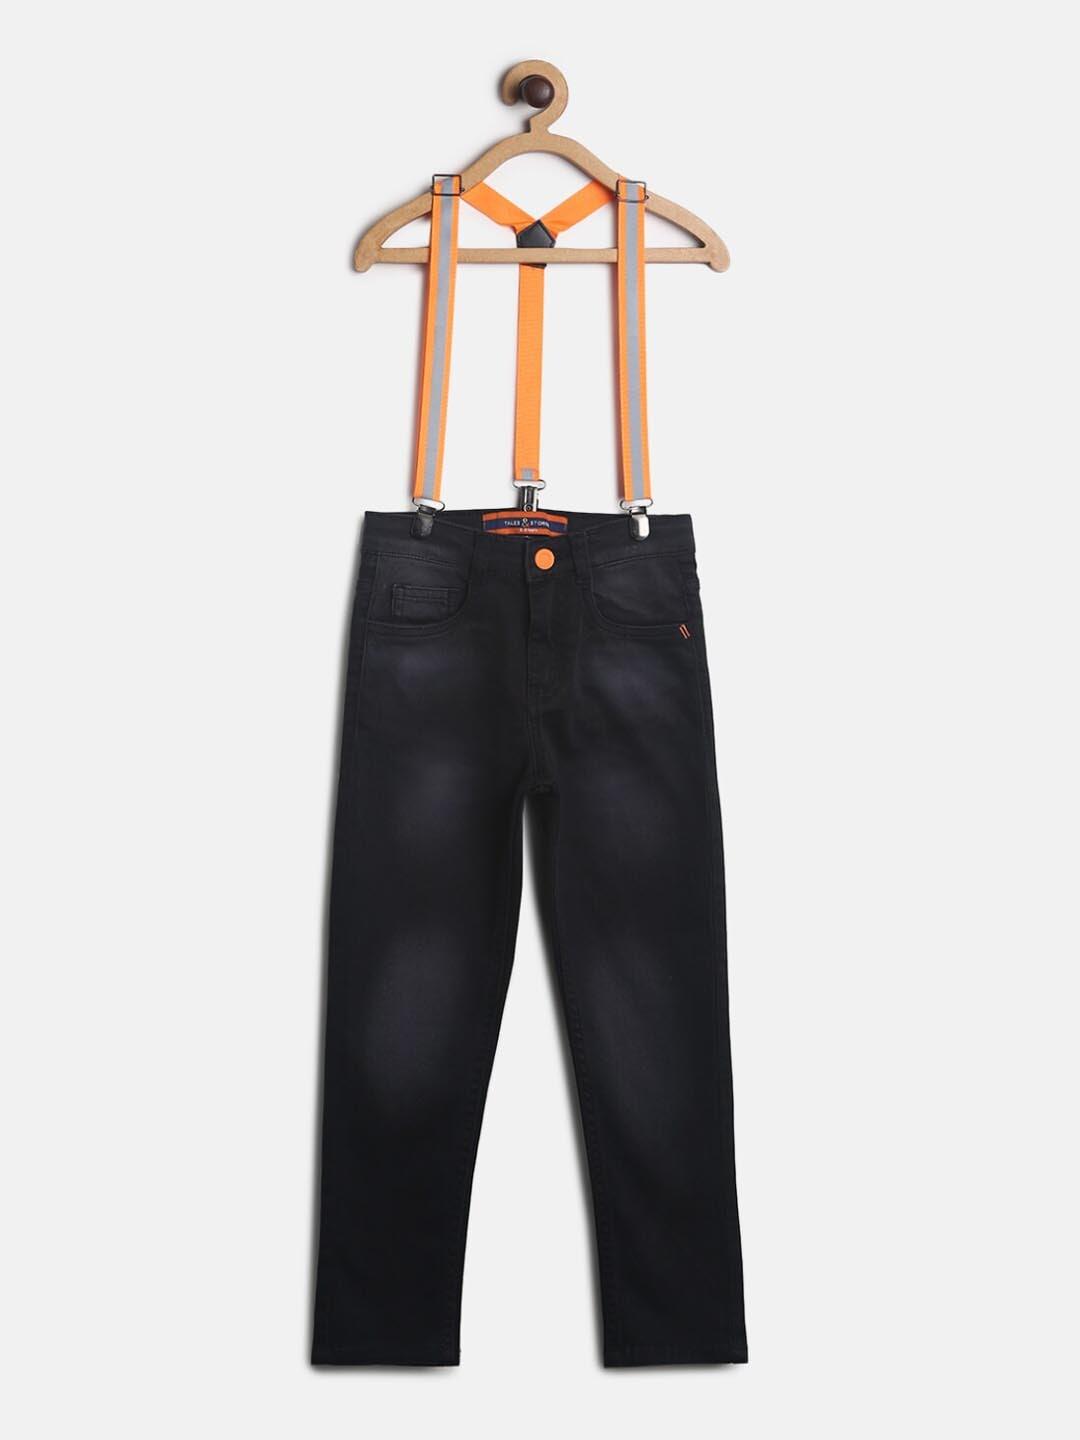 tales-&-stories-boys-black-slim-fit-light-fade-stretchable-jeans